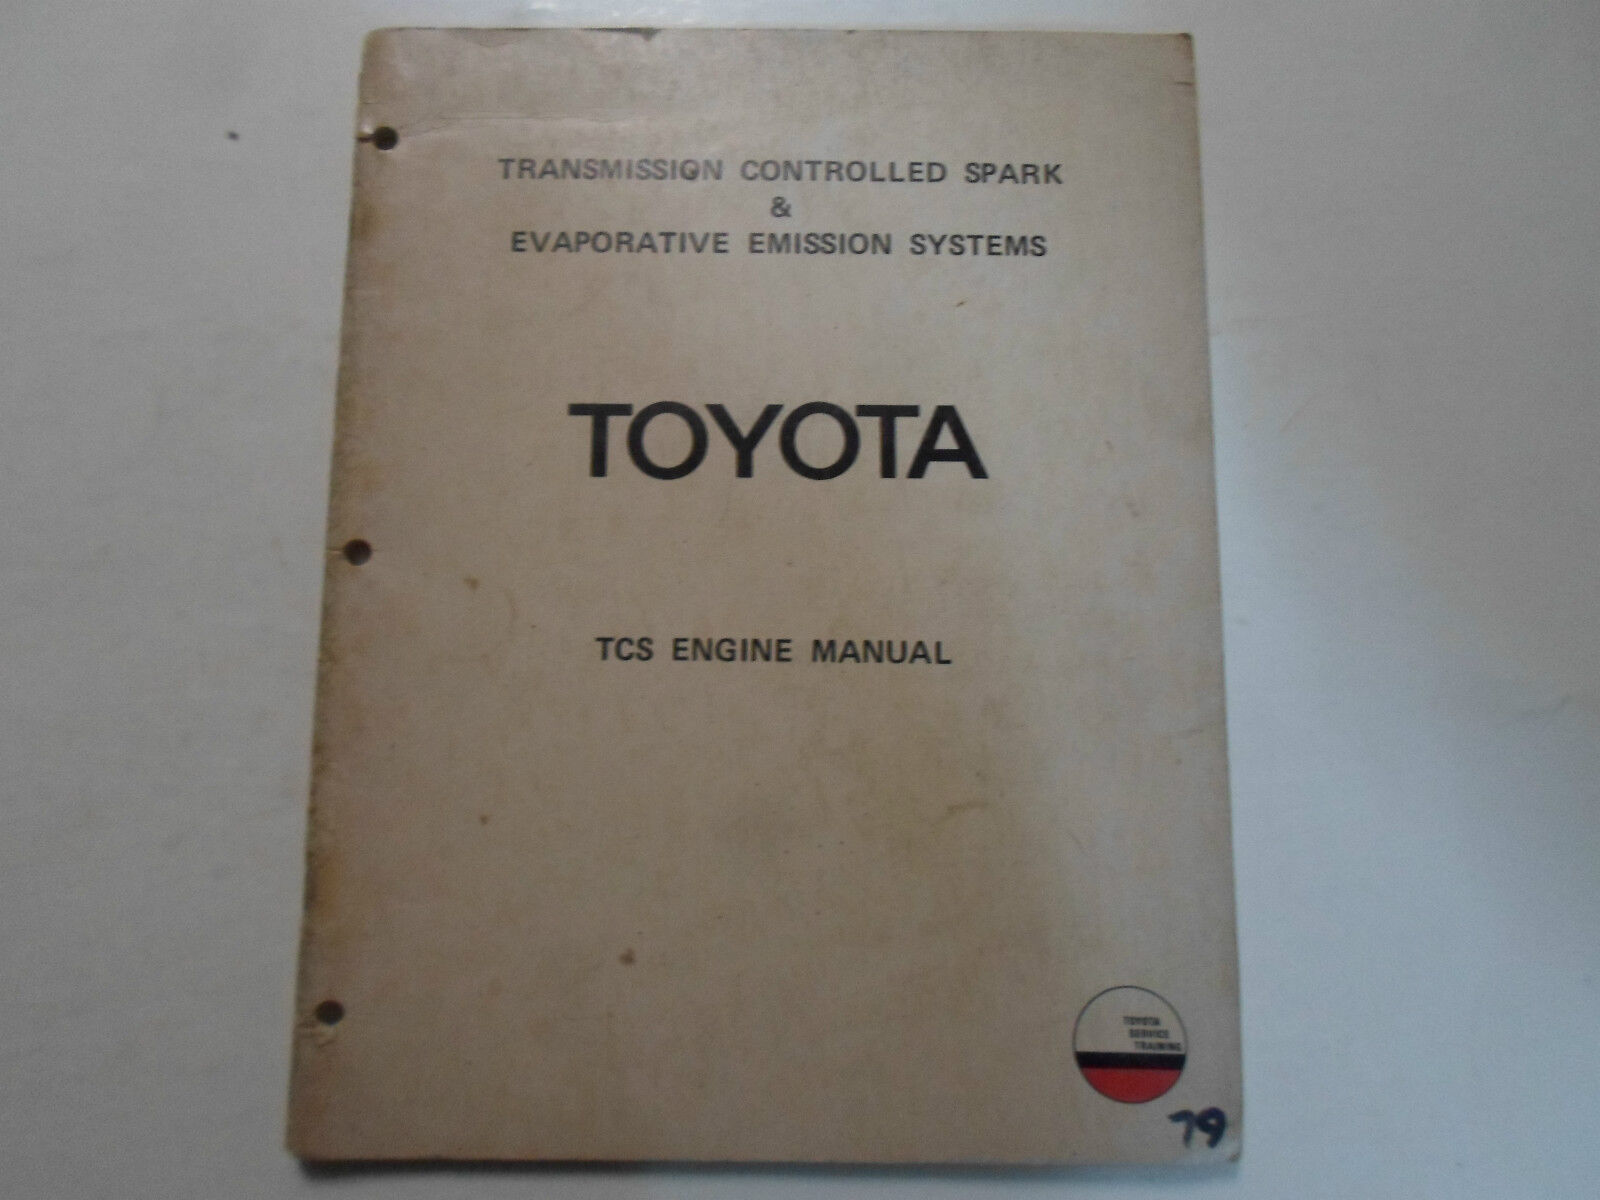 1979 Toyota TCS EMS Engine Service Repair Shop Manual Factory OEM Book Used - $19.79